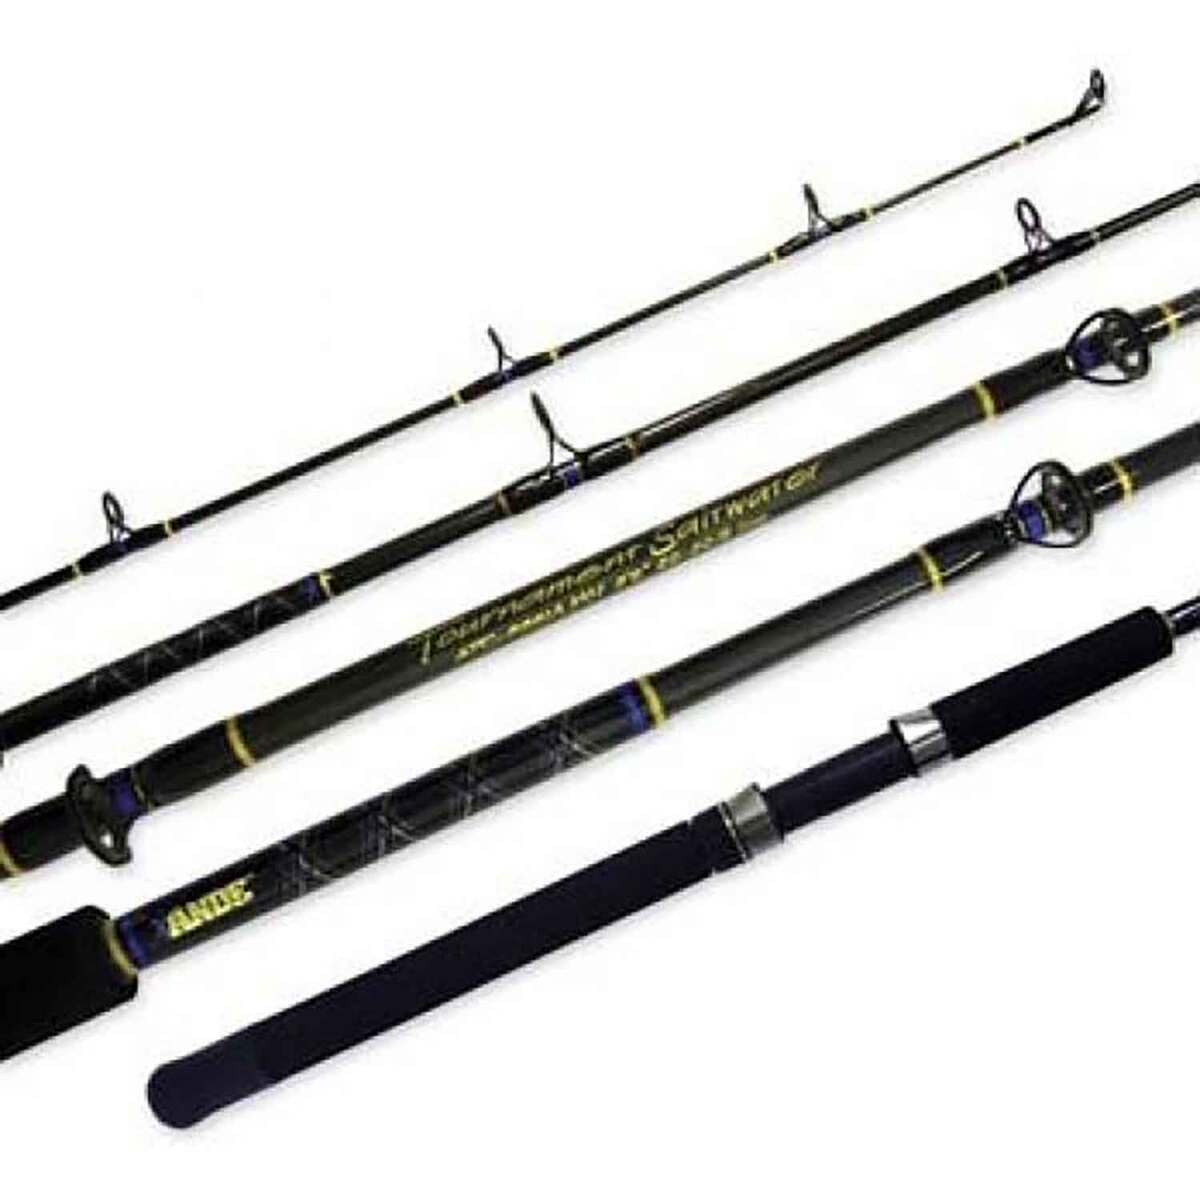 Ande Tournament 5000 Spinning Rod